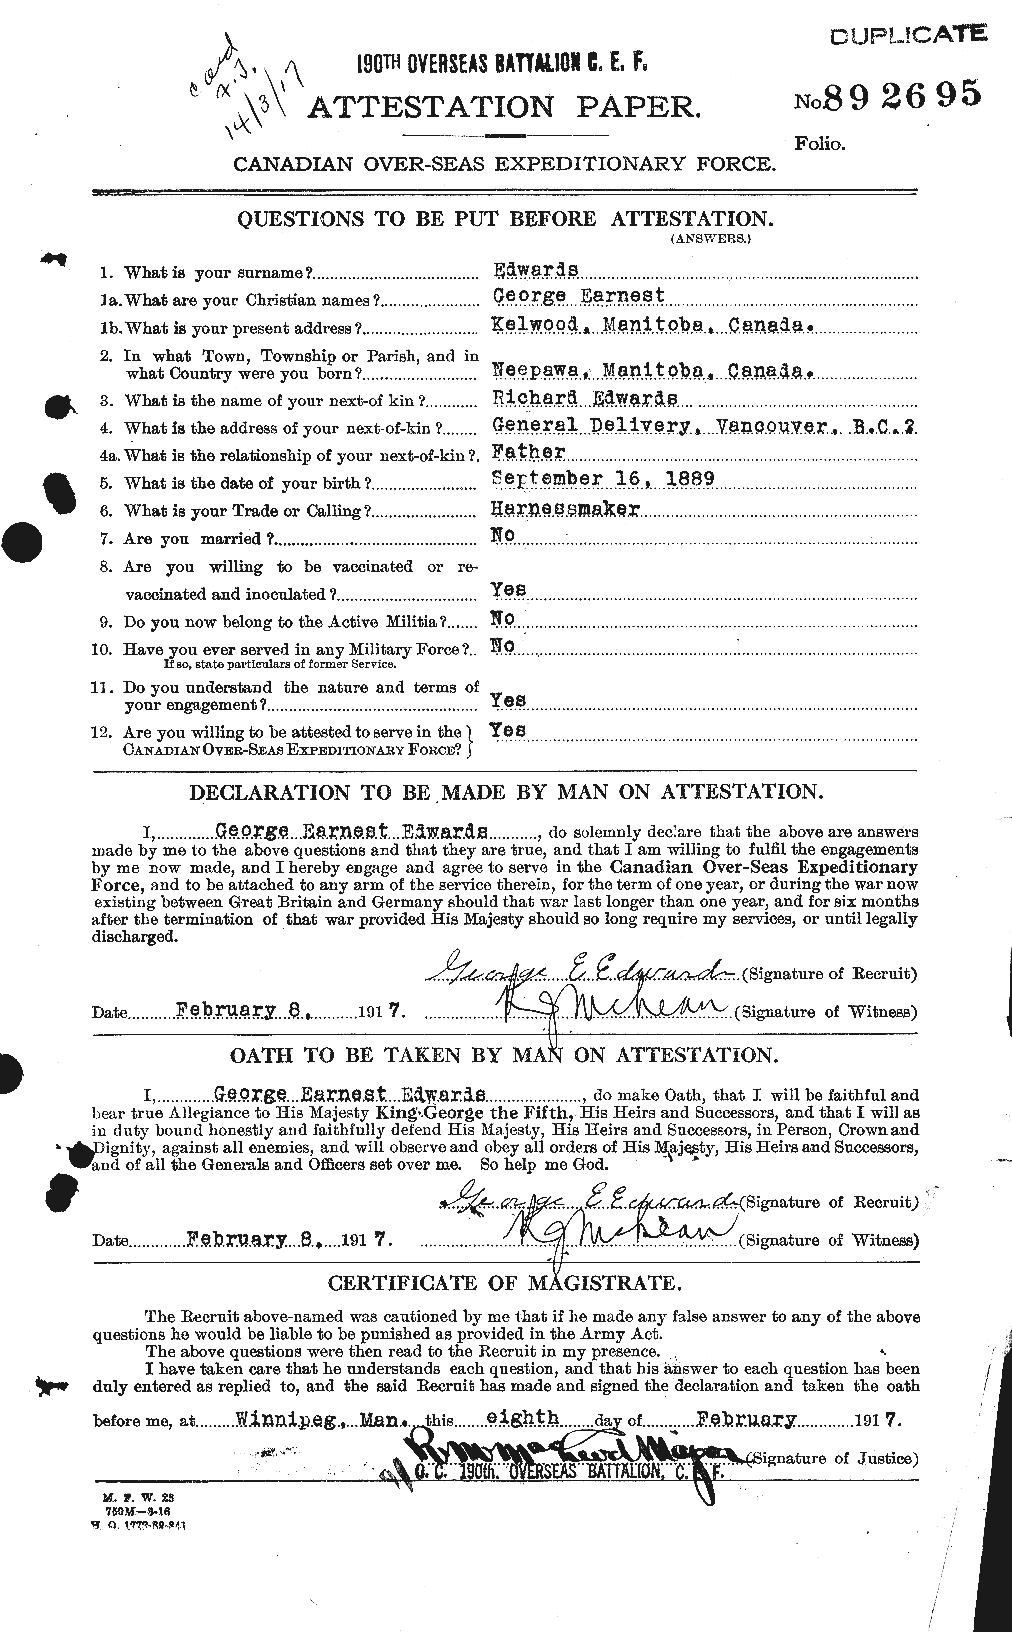 Personnel Records of the First World War - CEF 309681a